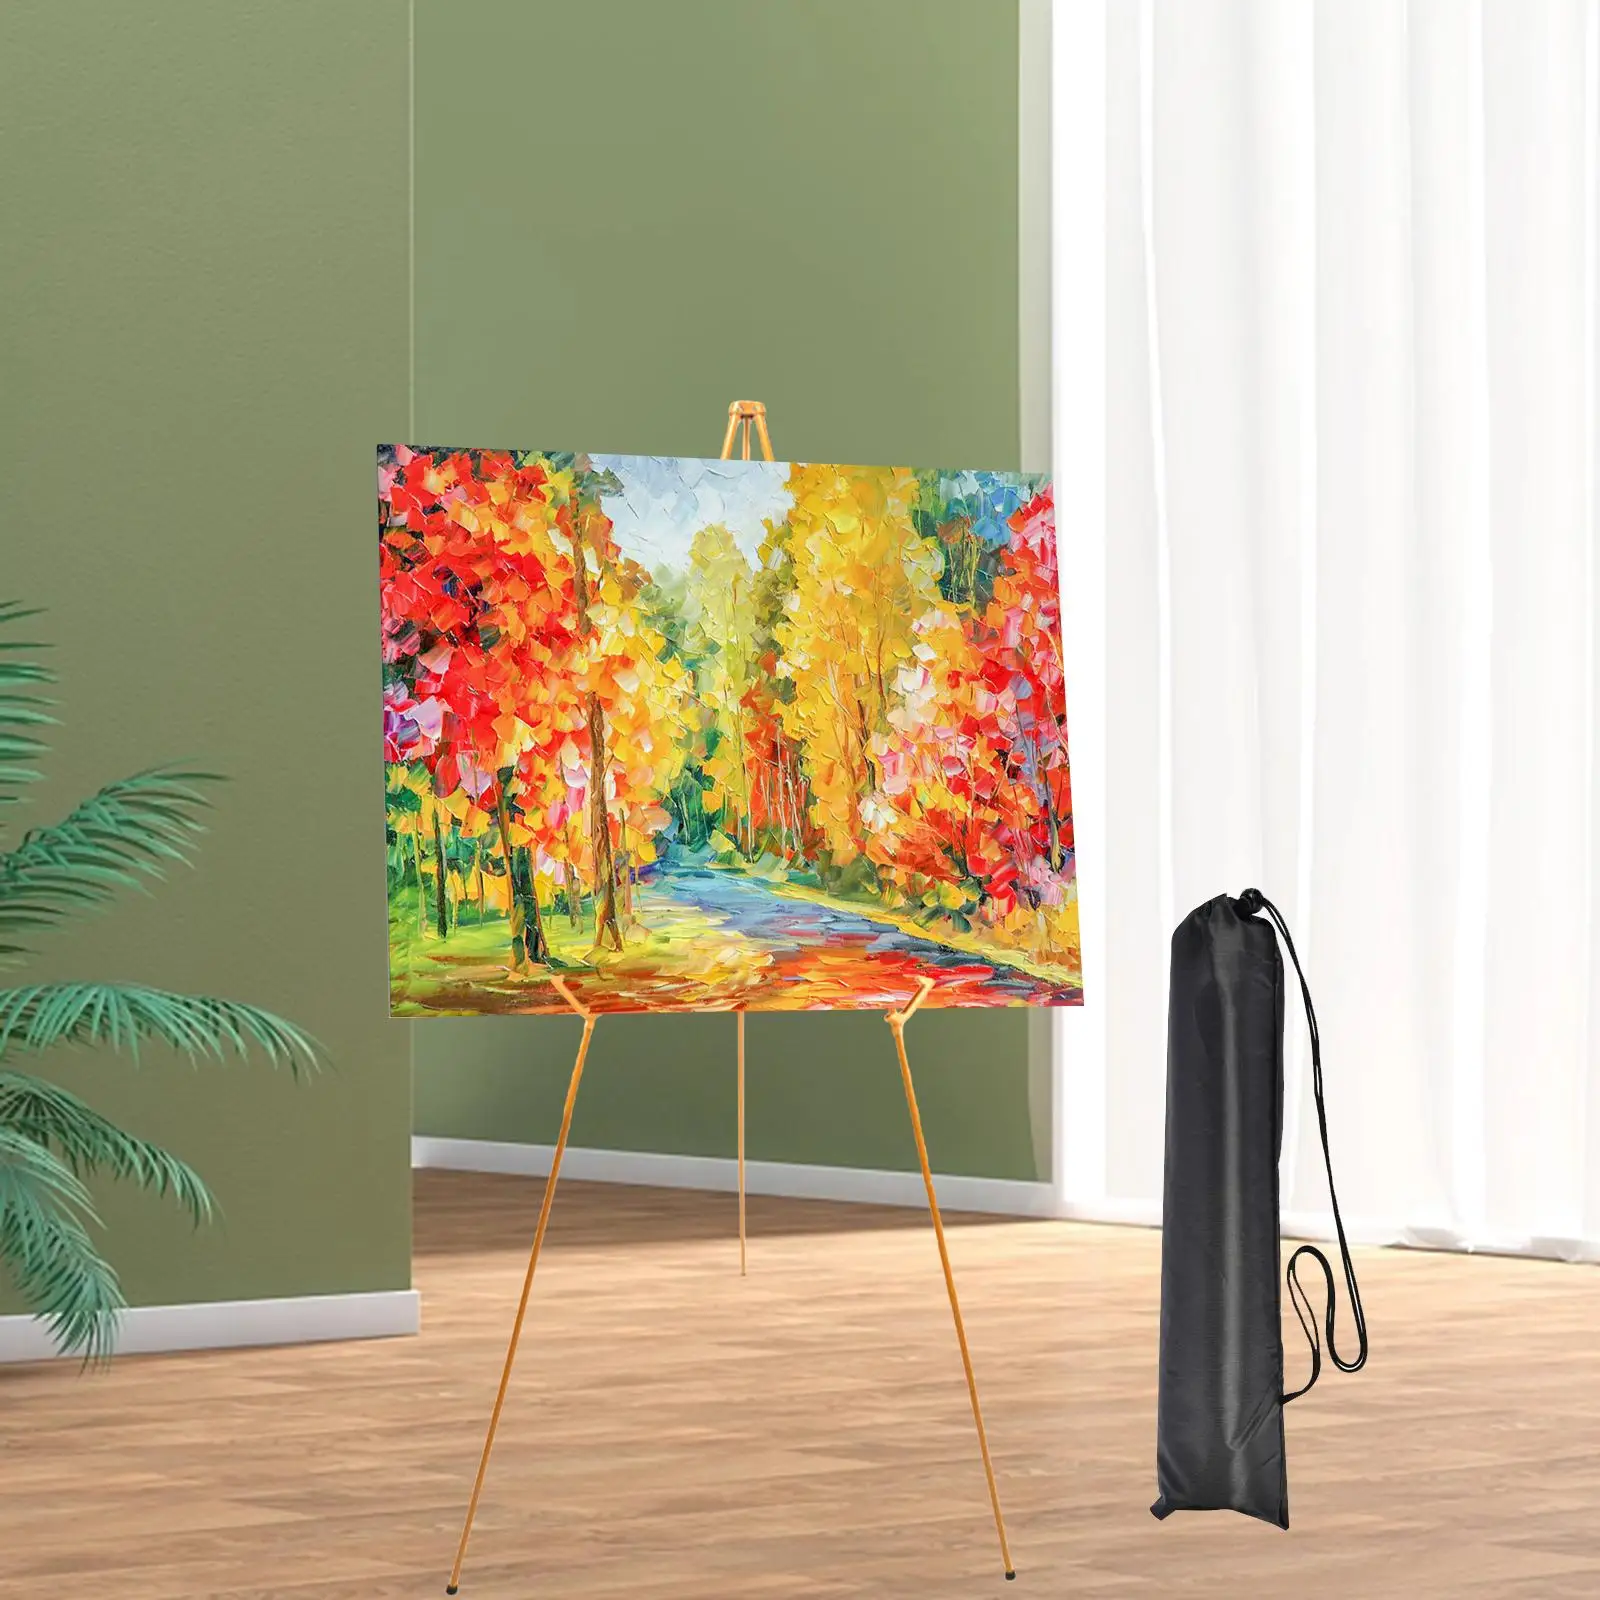 https://ae01.alicdn.com/kf/Se687453a2df546a98fb1541467300069r/Tripod-Display-Easel-Stand-Art-Drawing-Easels-Painting-Art-Easel-Holder-for-Photo-Frame-Art-Boards.jpg